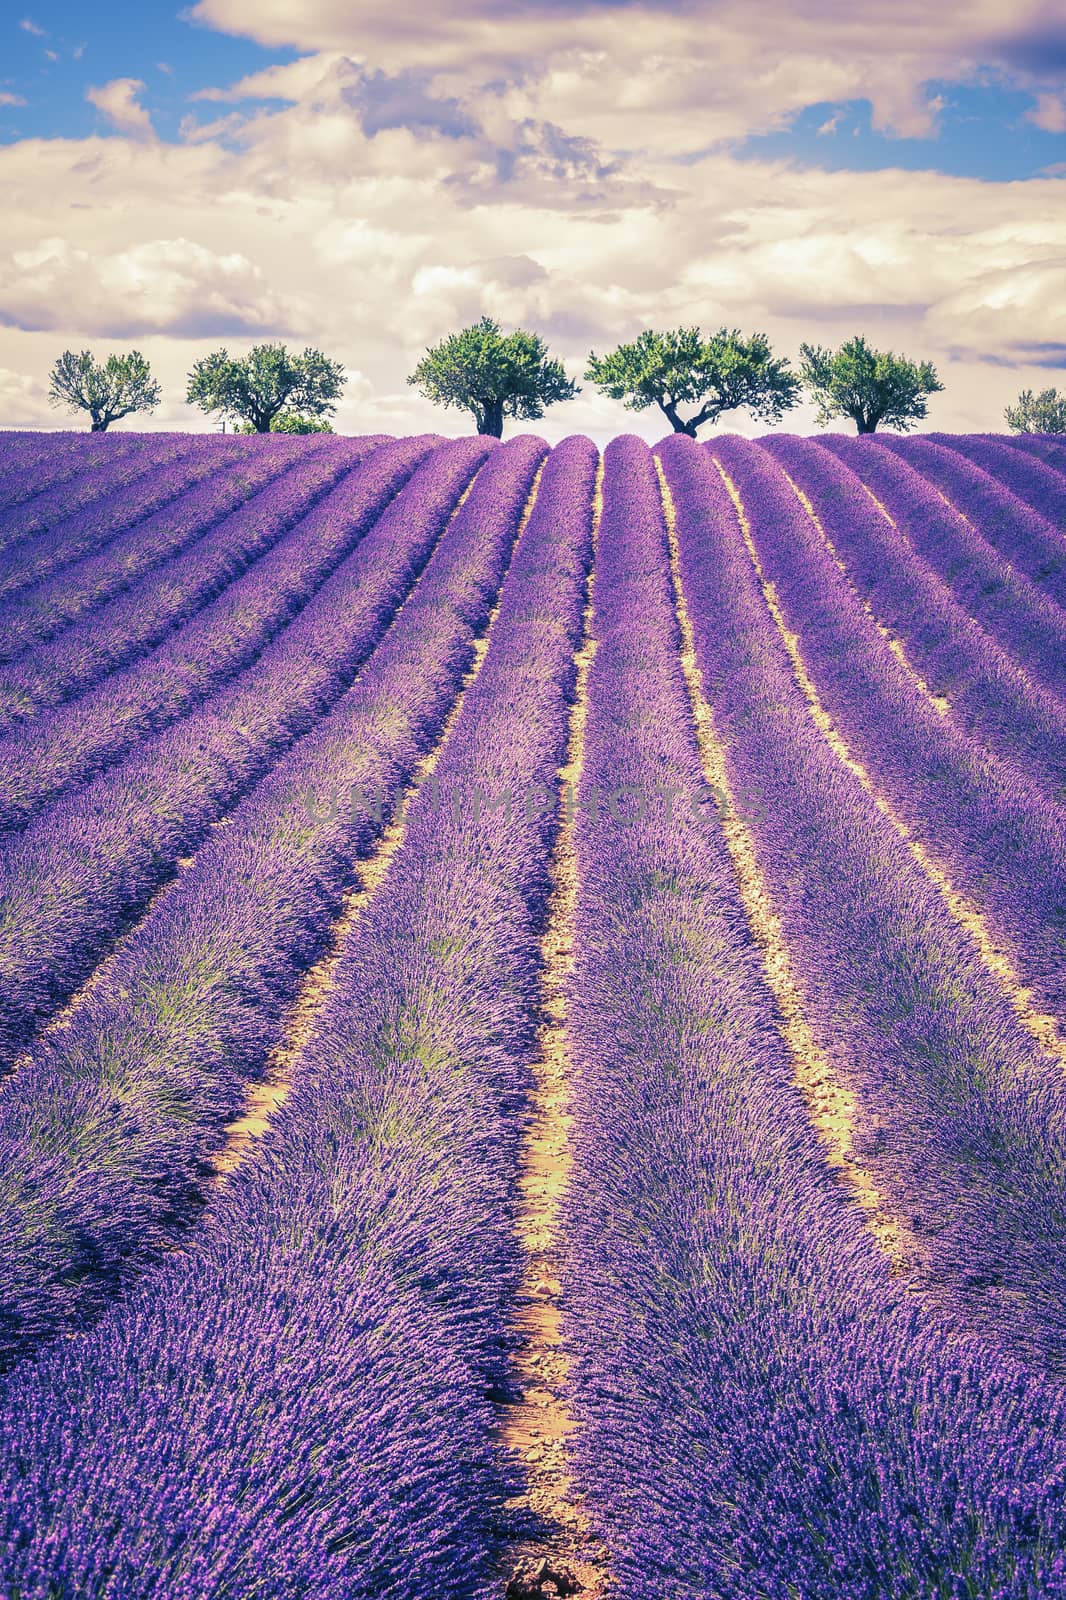 Lavender field with trees in Provence at sunset, France